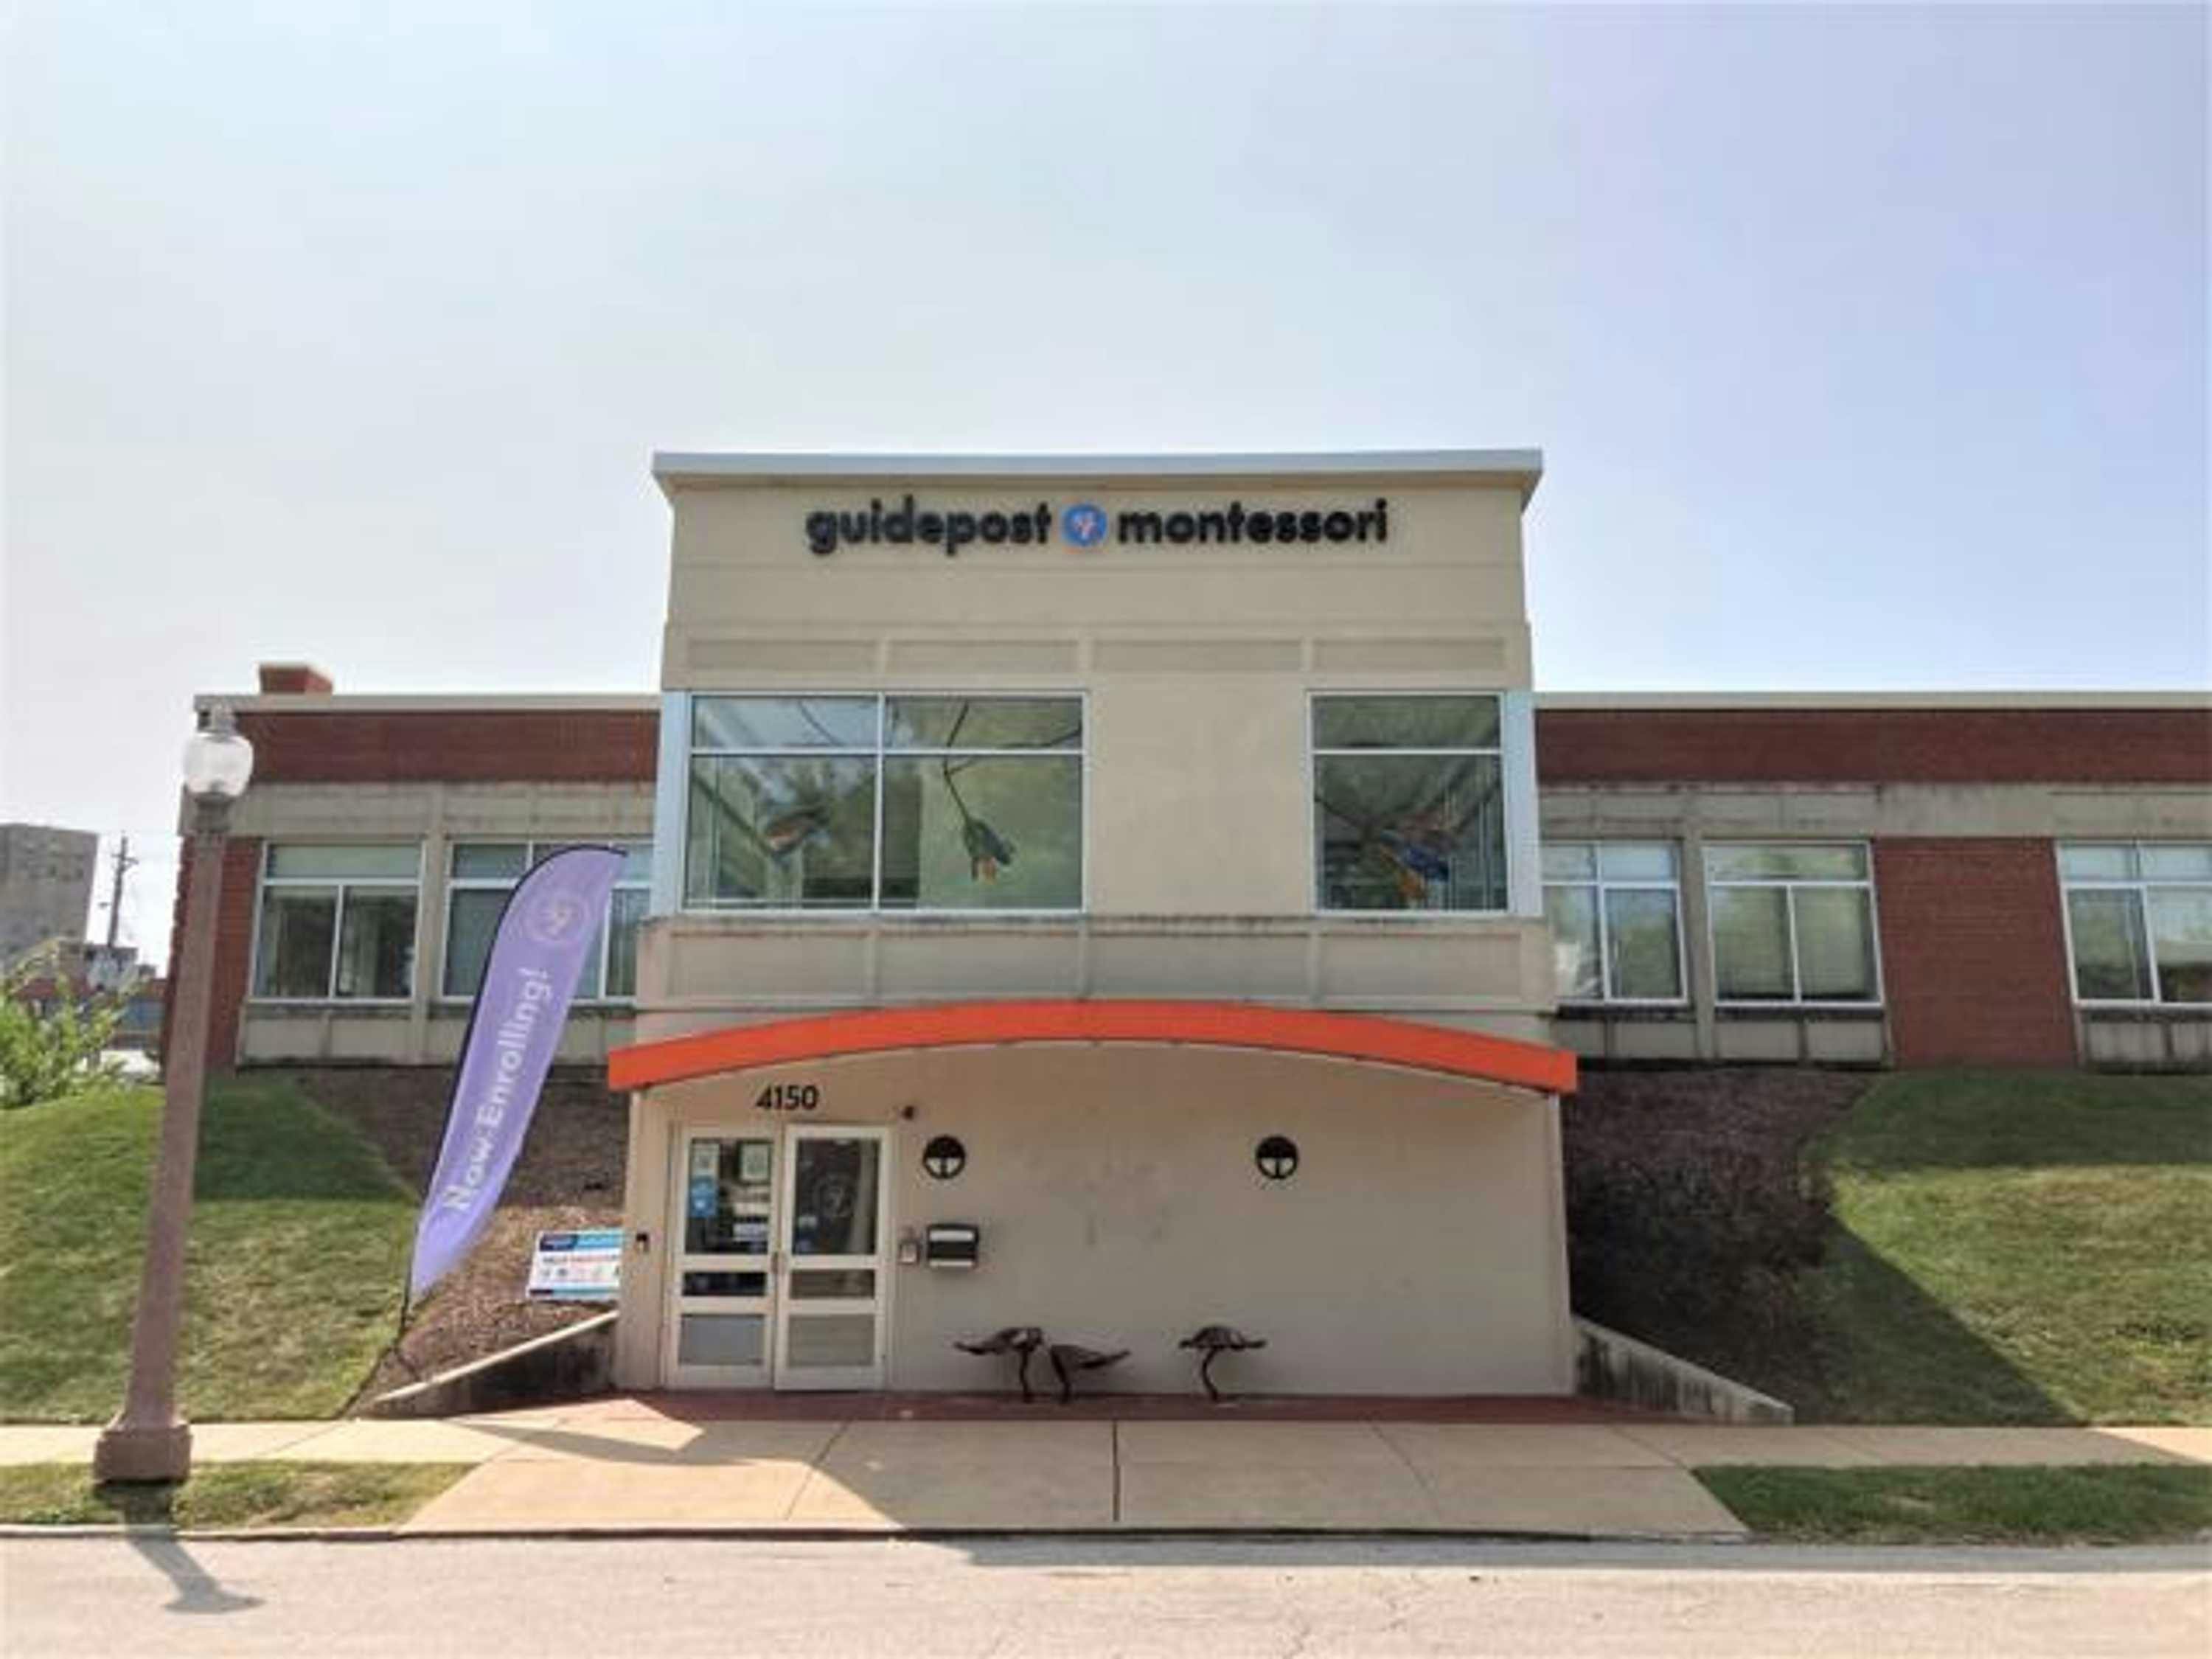 View of Guidepost Montessori at Central West End from the street that shows the exterior of the building with a feather banner in front and an orange awning below a row of windows and a branded Guidepost Montessori sign.